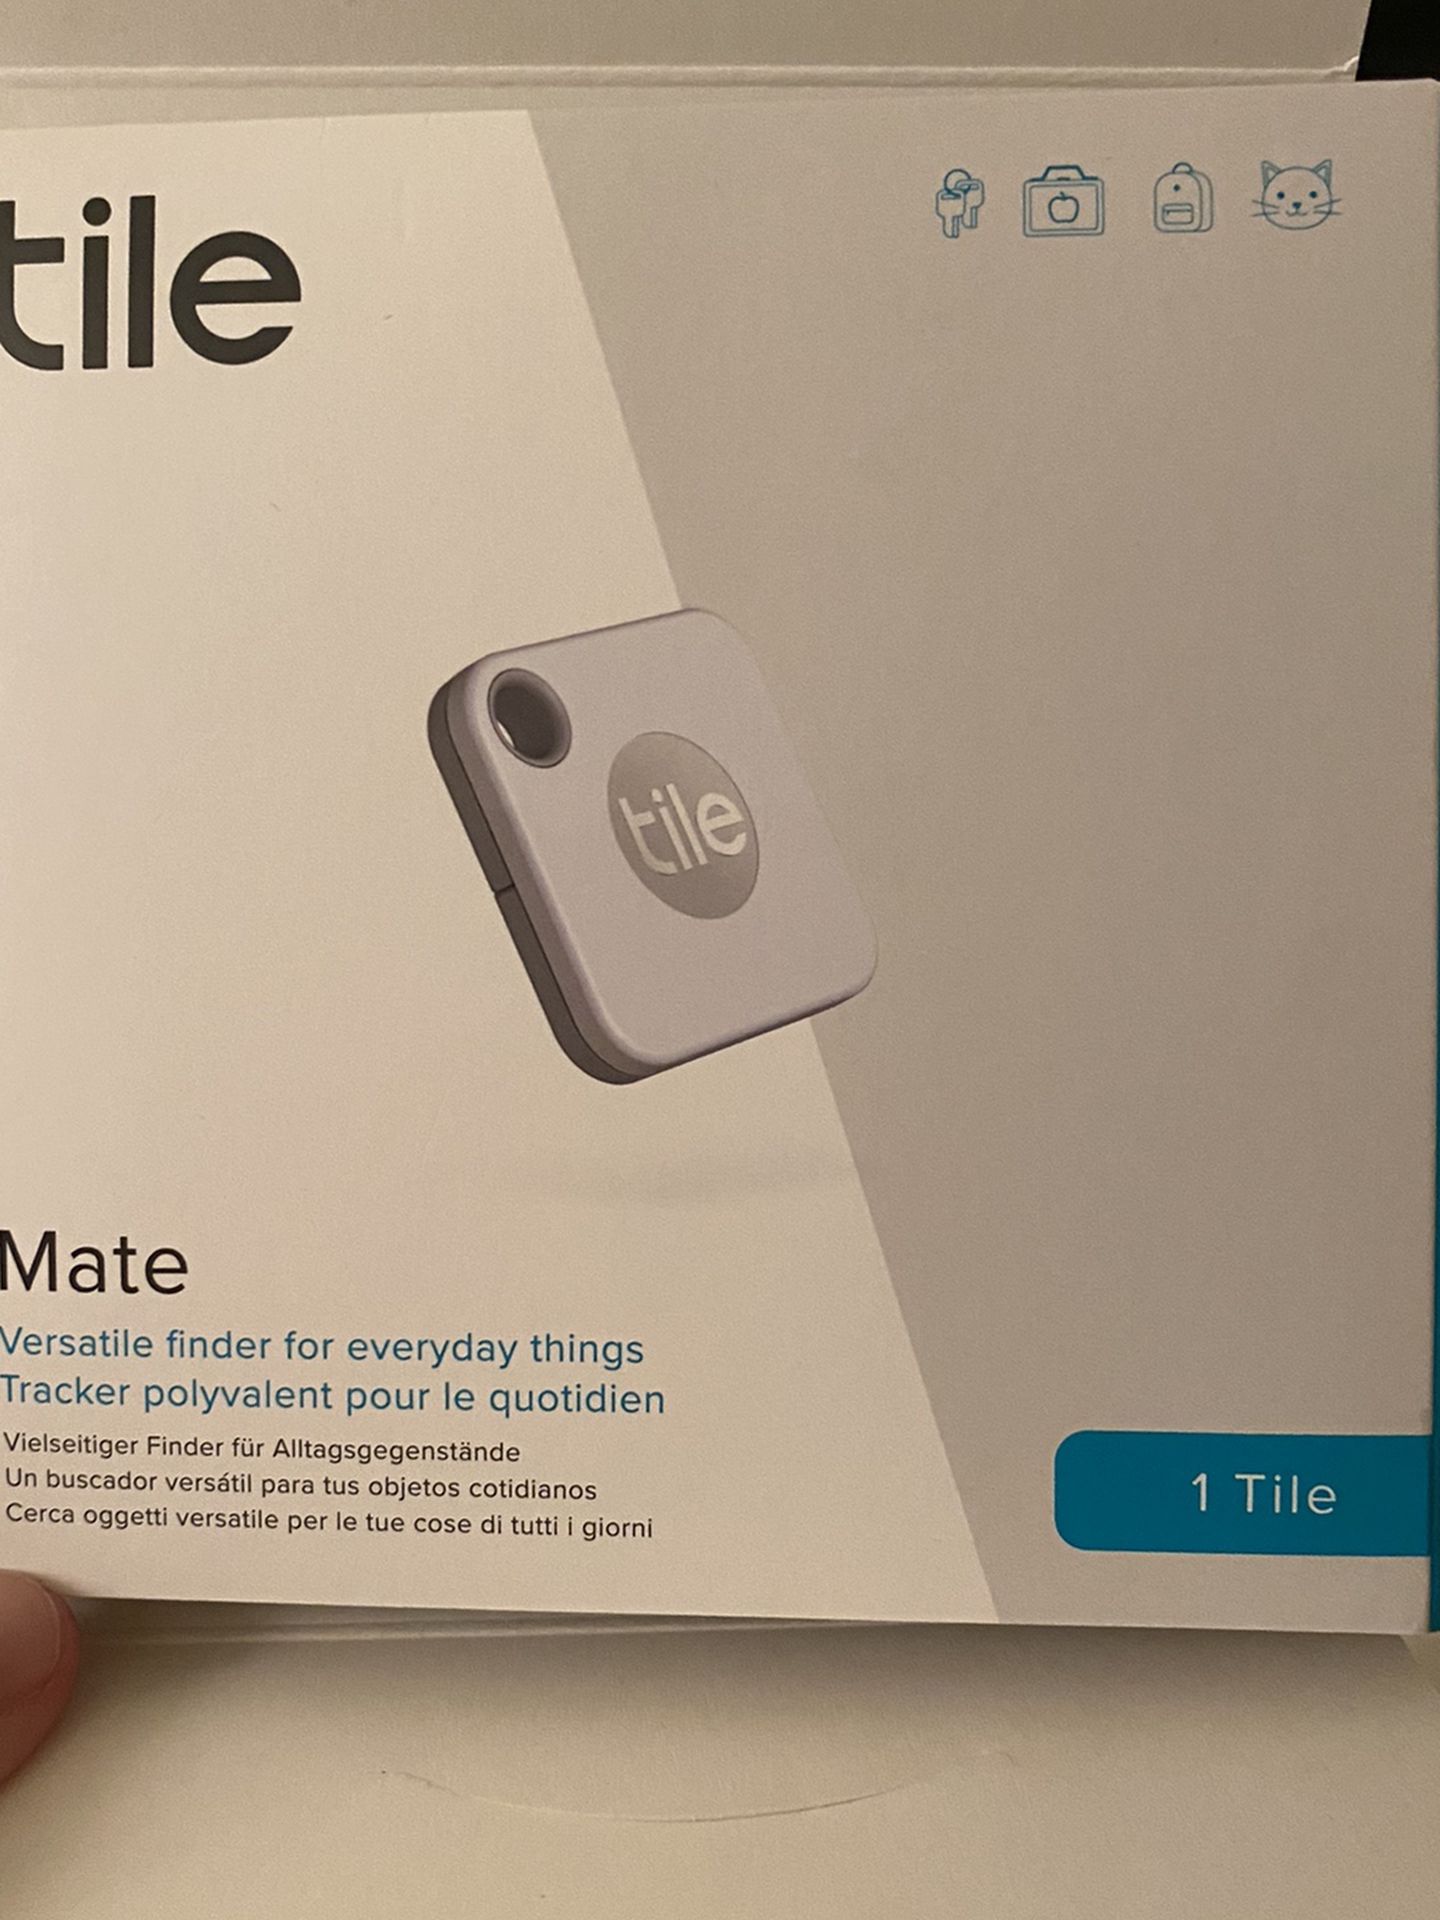 Tile Mate: Versatile Finder For Everyday Things